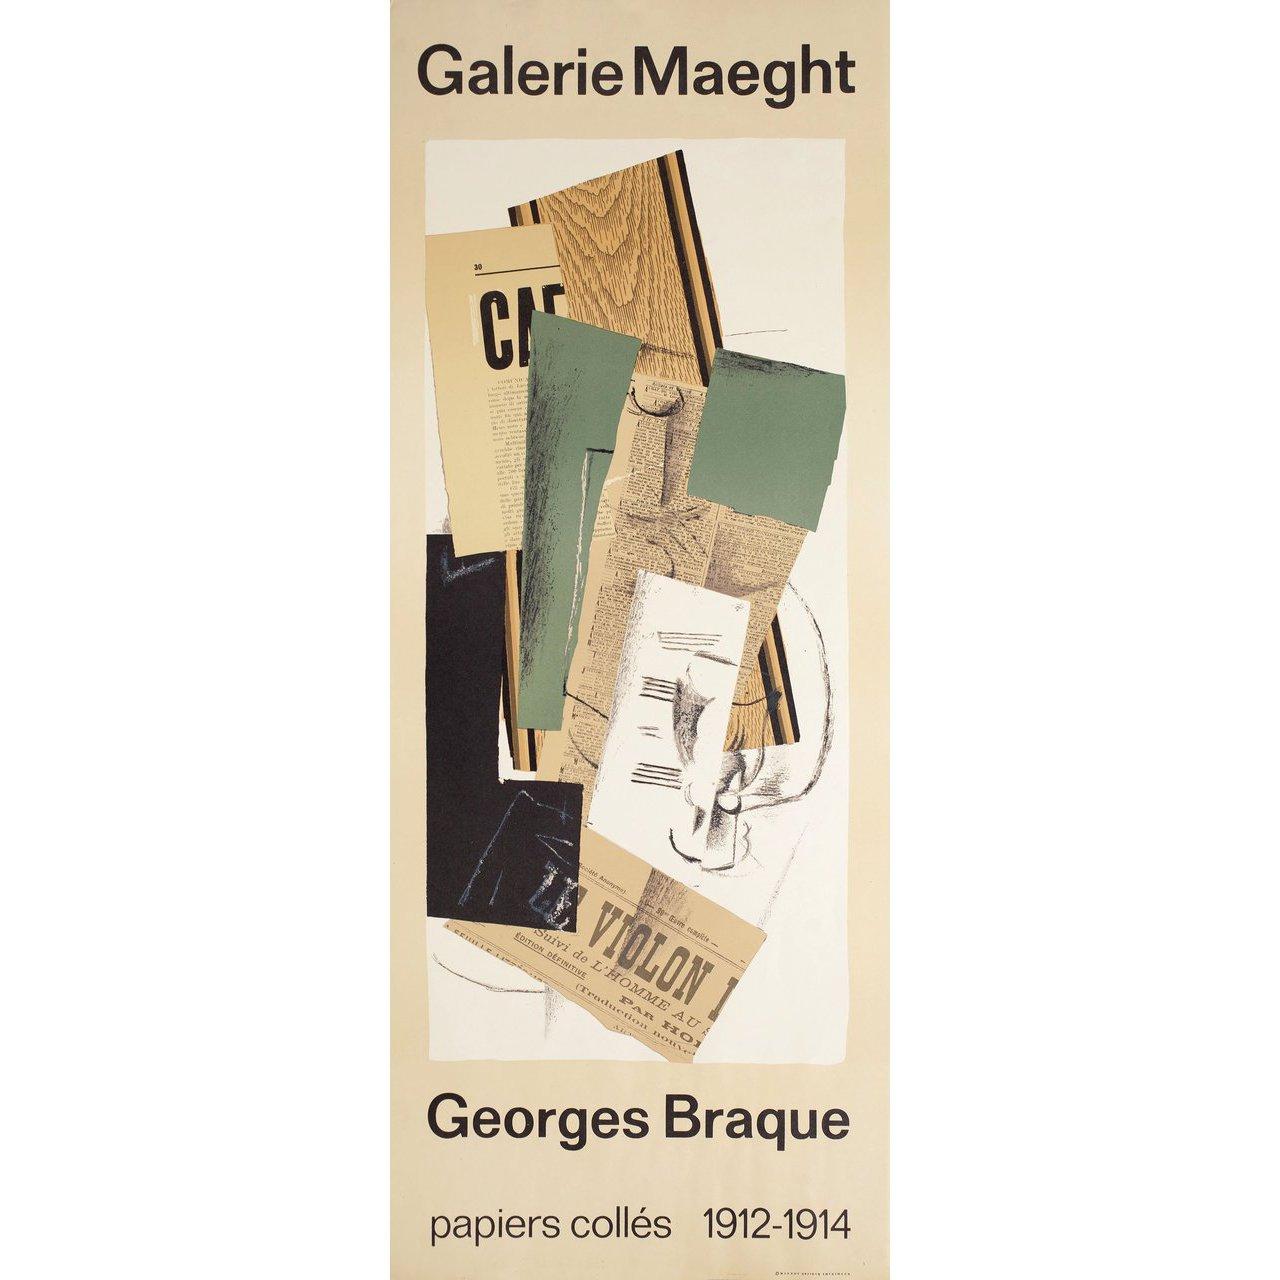 Original 1970s French insert poster by Georges Braque for the exhibition Georges Braque: Papiers Colles 1912-1914. Very good-Ffne condition, rolled. Please note: the size is stated in inches and the actual size can vary by an inch or more.
 